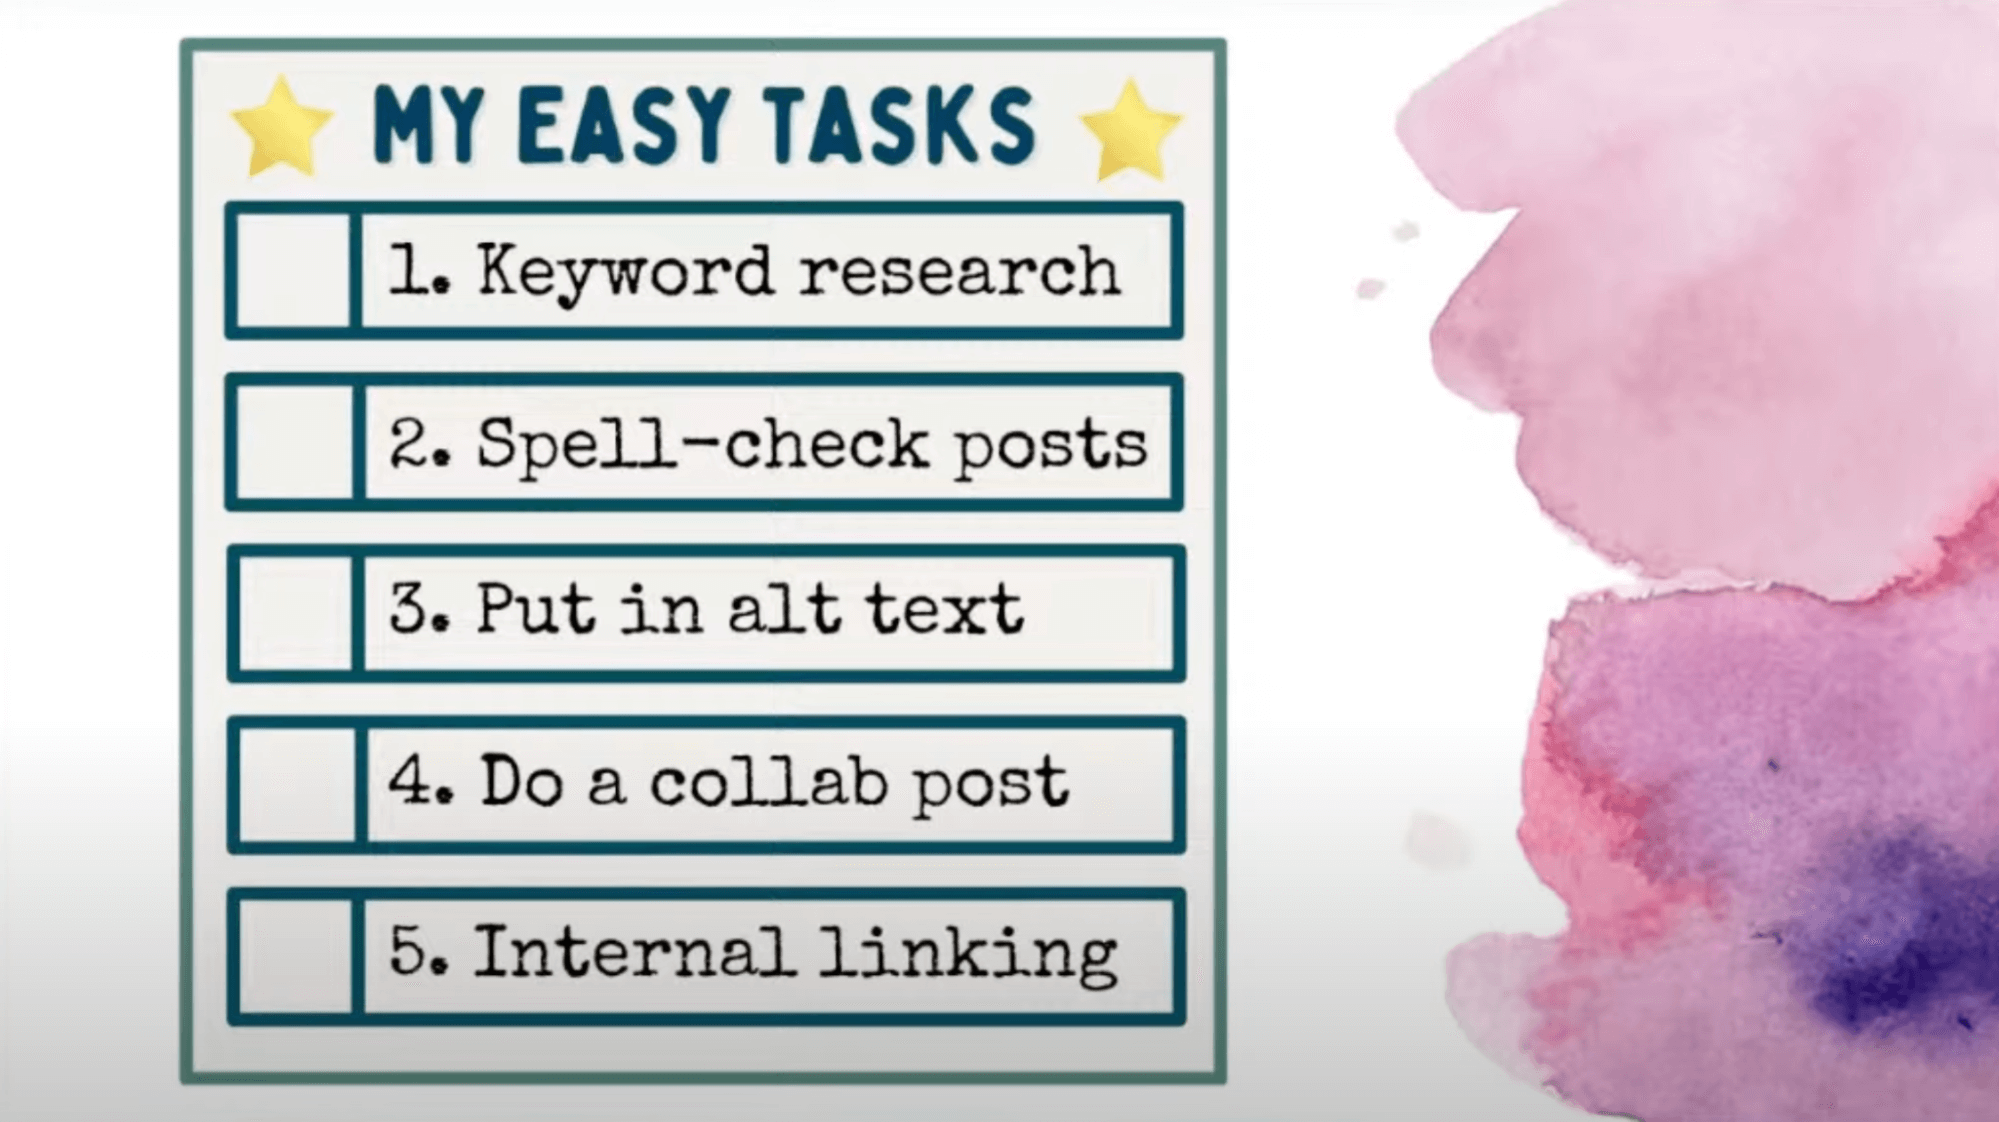 A screenshot of a list that says, “My Easy Tasks,” and lists out the following tasks: keyword research, spell-checking posts, putting in the alt text, doing collab posts, and internal linking.